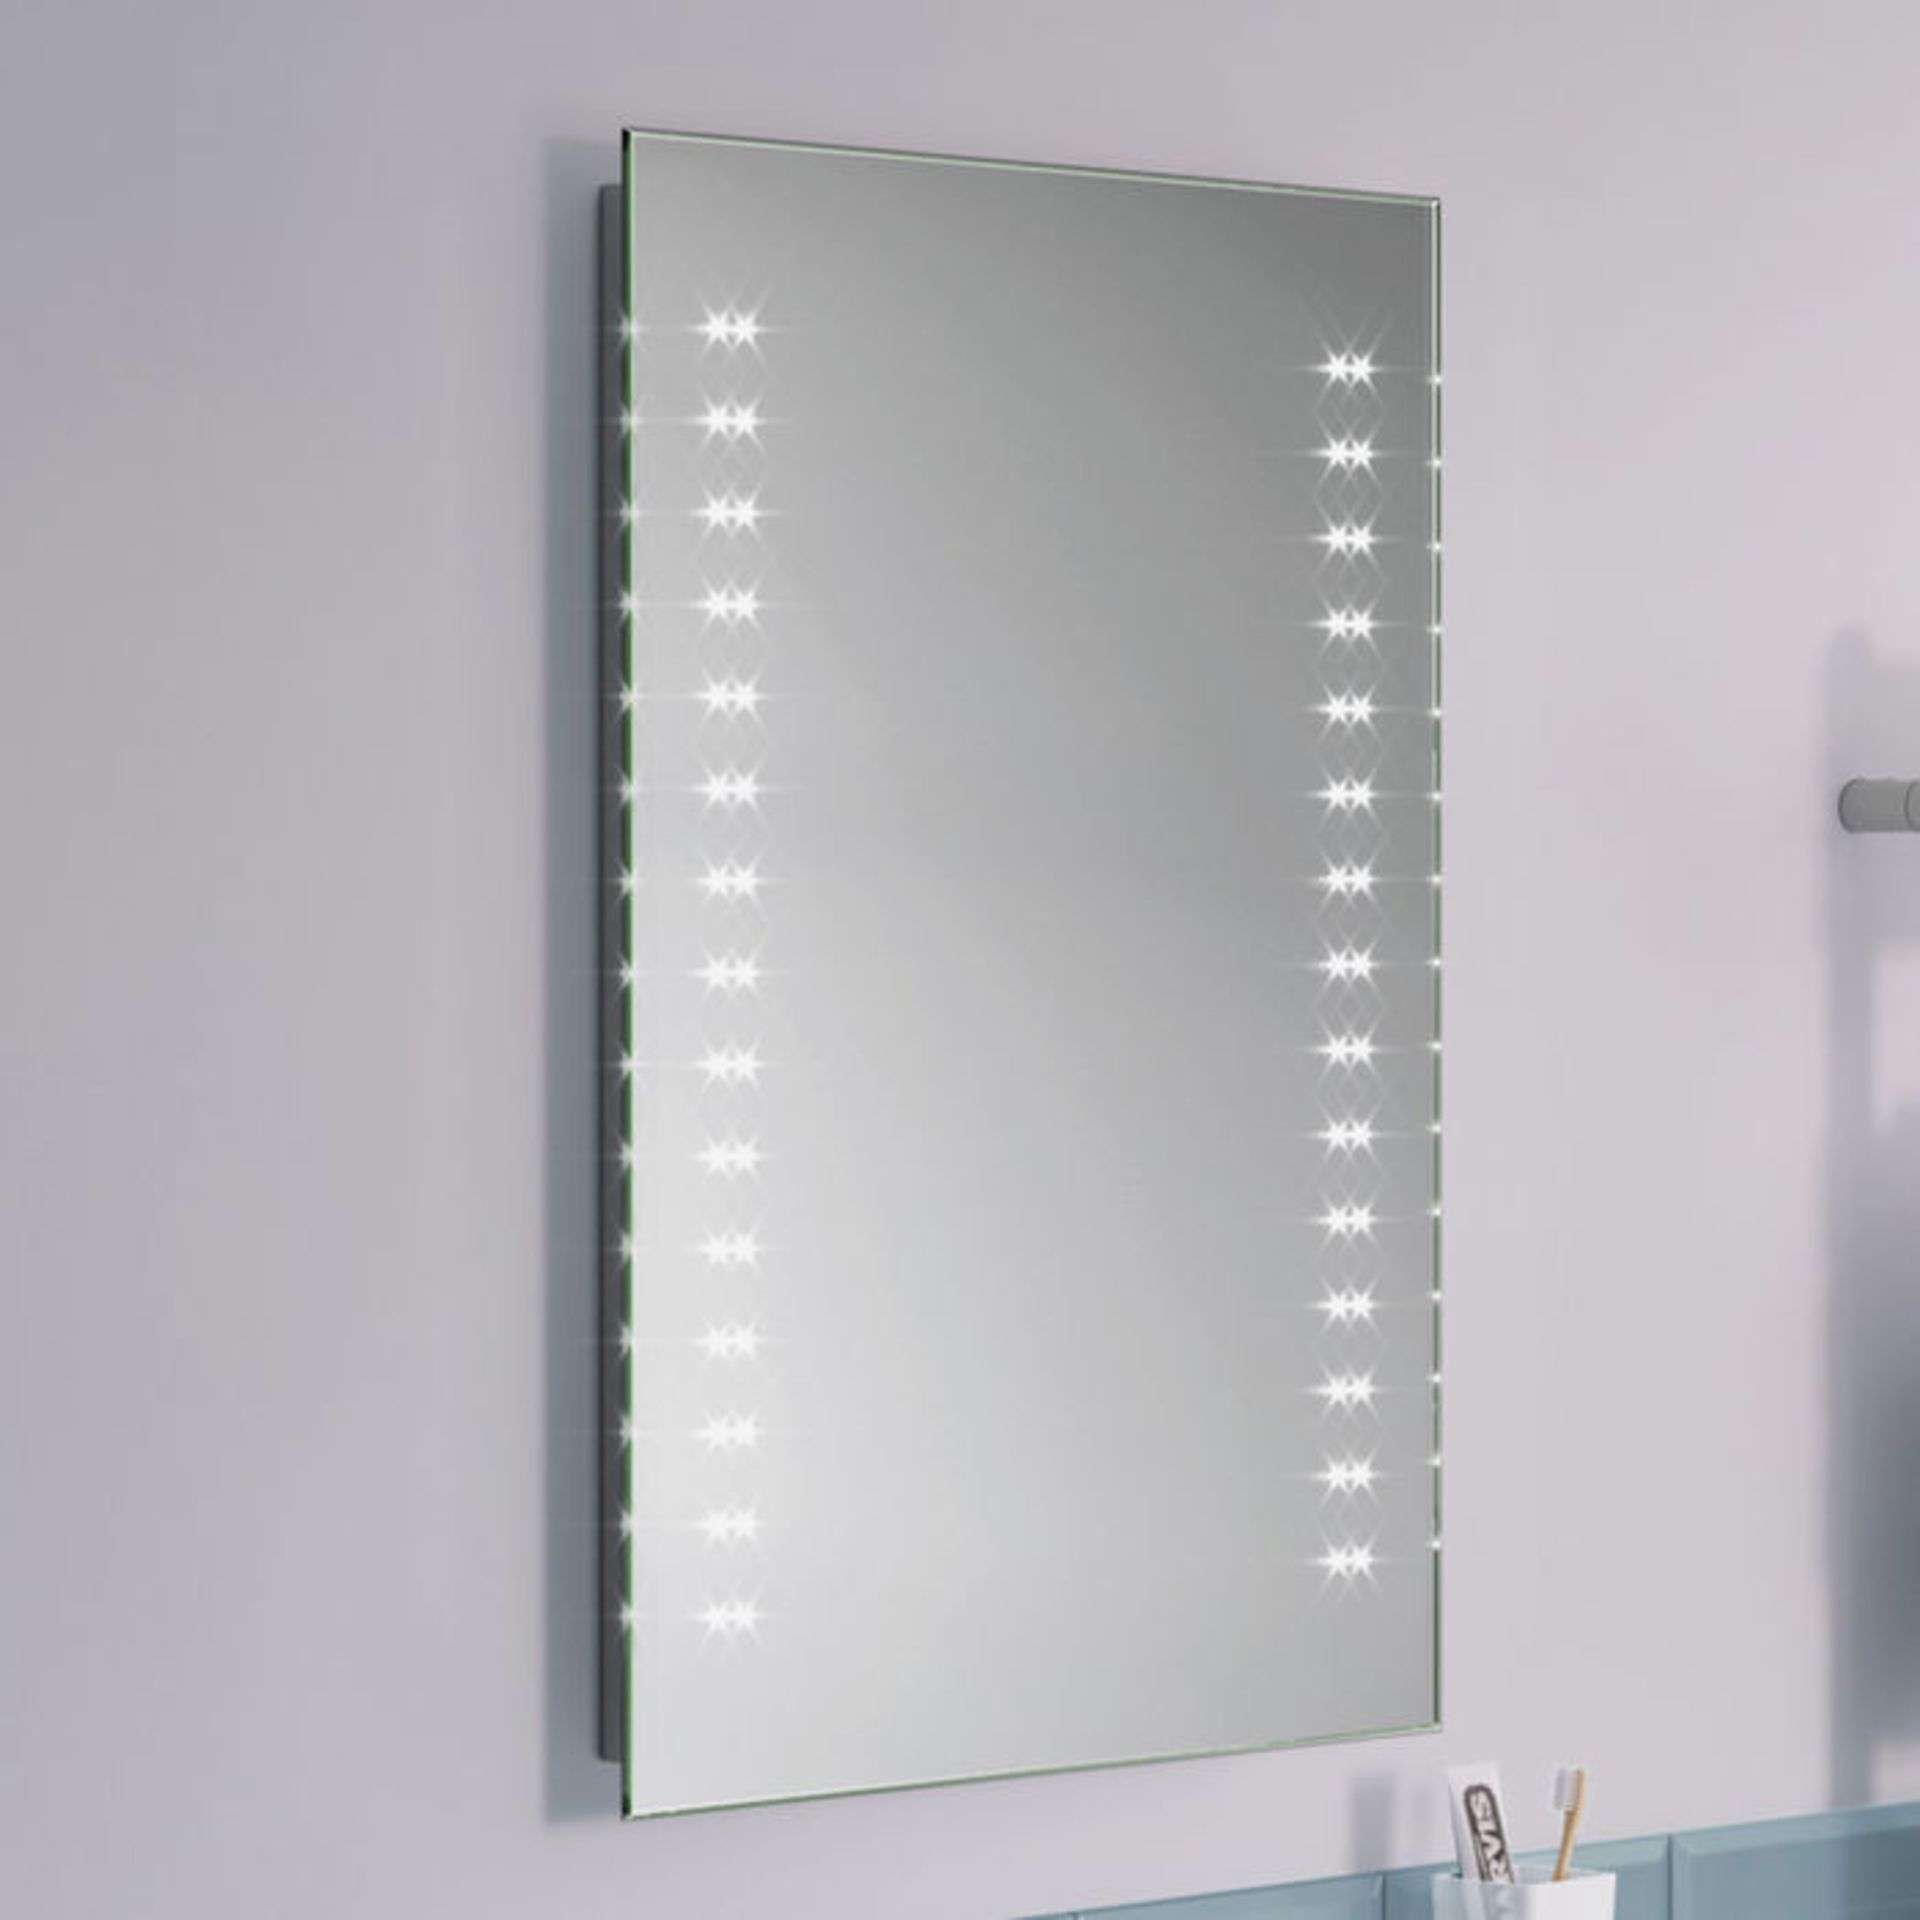 (T114) 500x700mm Galactic LED Mirror - Battery Operated. Energy saving controlled On / Off - Image 2 of 2